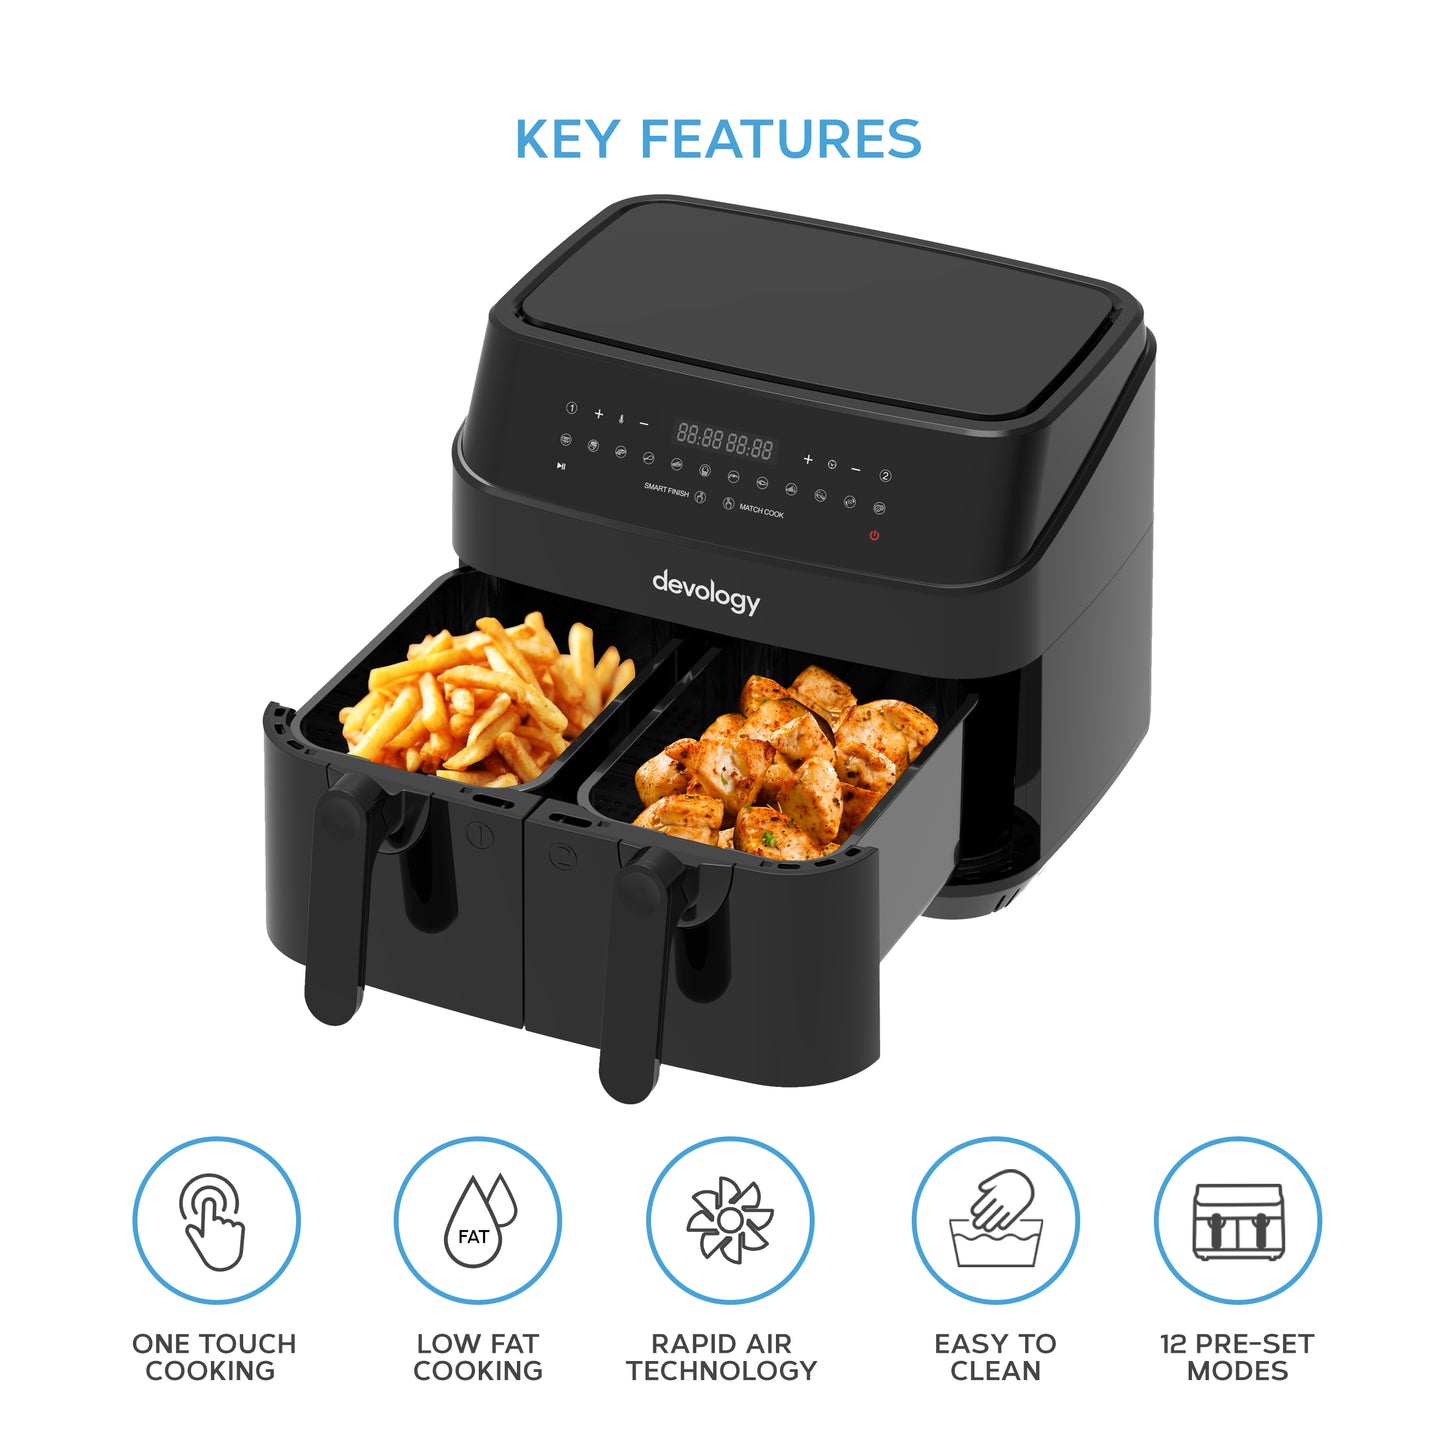 Devology 9L Dual Zone Air Fryer with 12 Pre-Set Modes and FREE 50 recipe Cookbook - Black